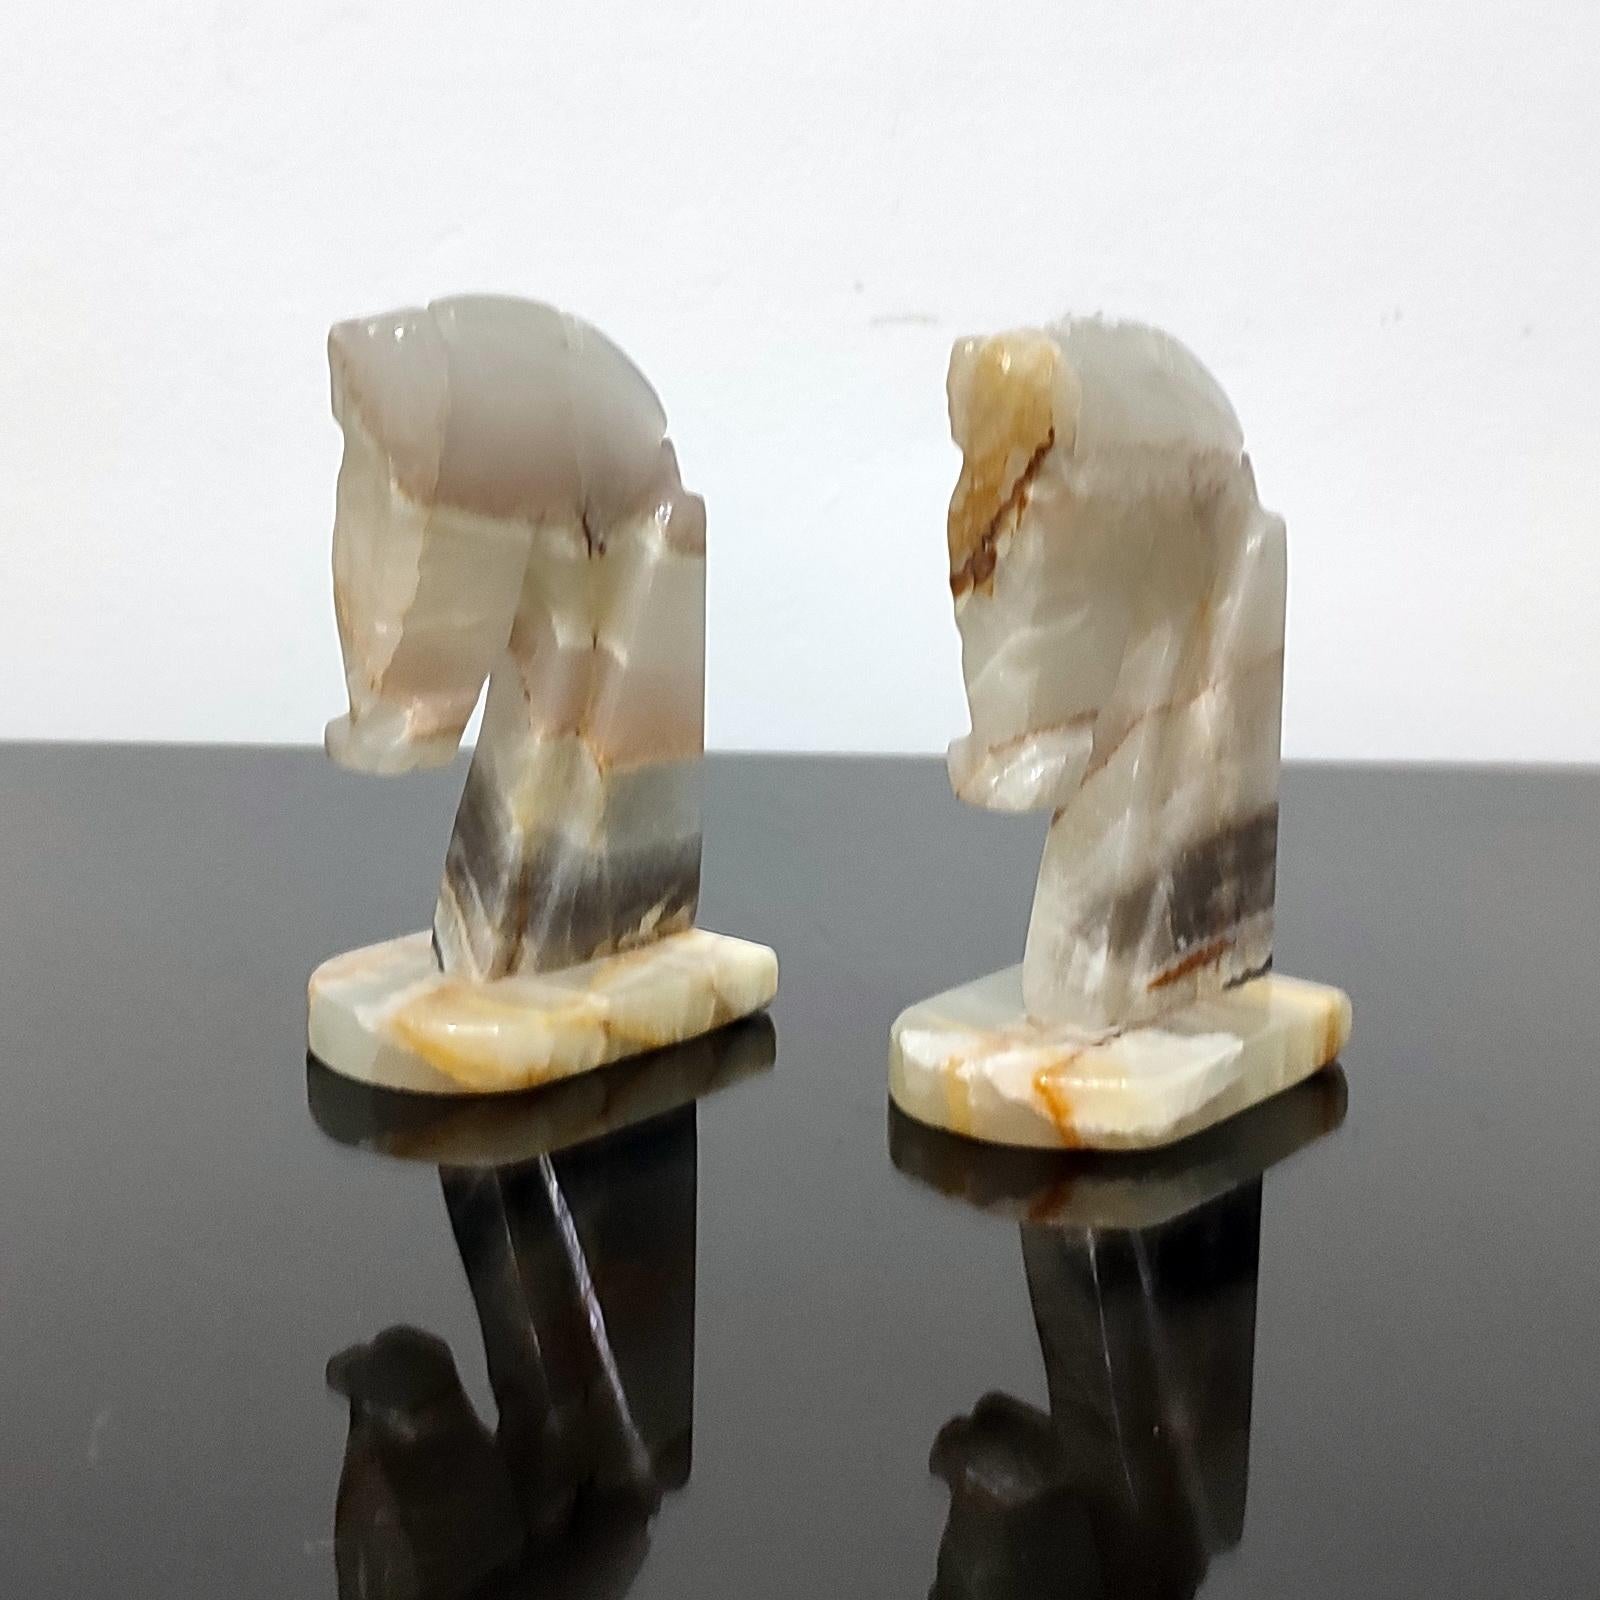 Hand-Carved Italian Hand Carved Onyx Deco Style Horse Head Bookends For Sale